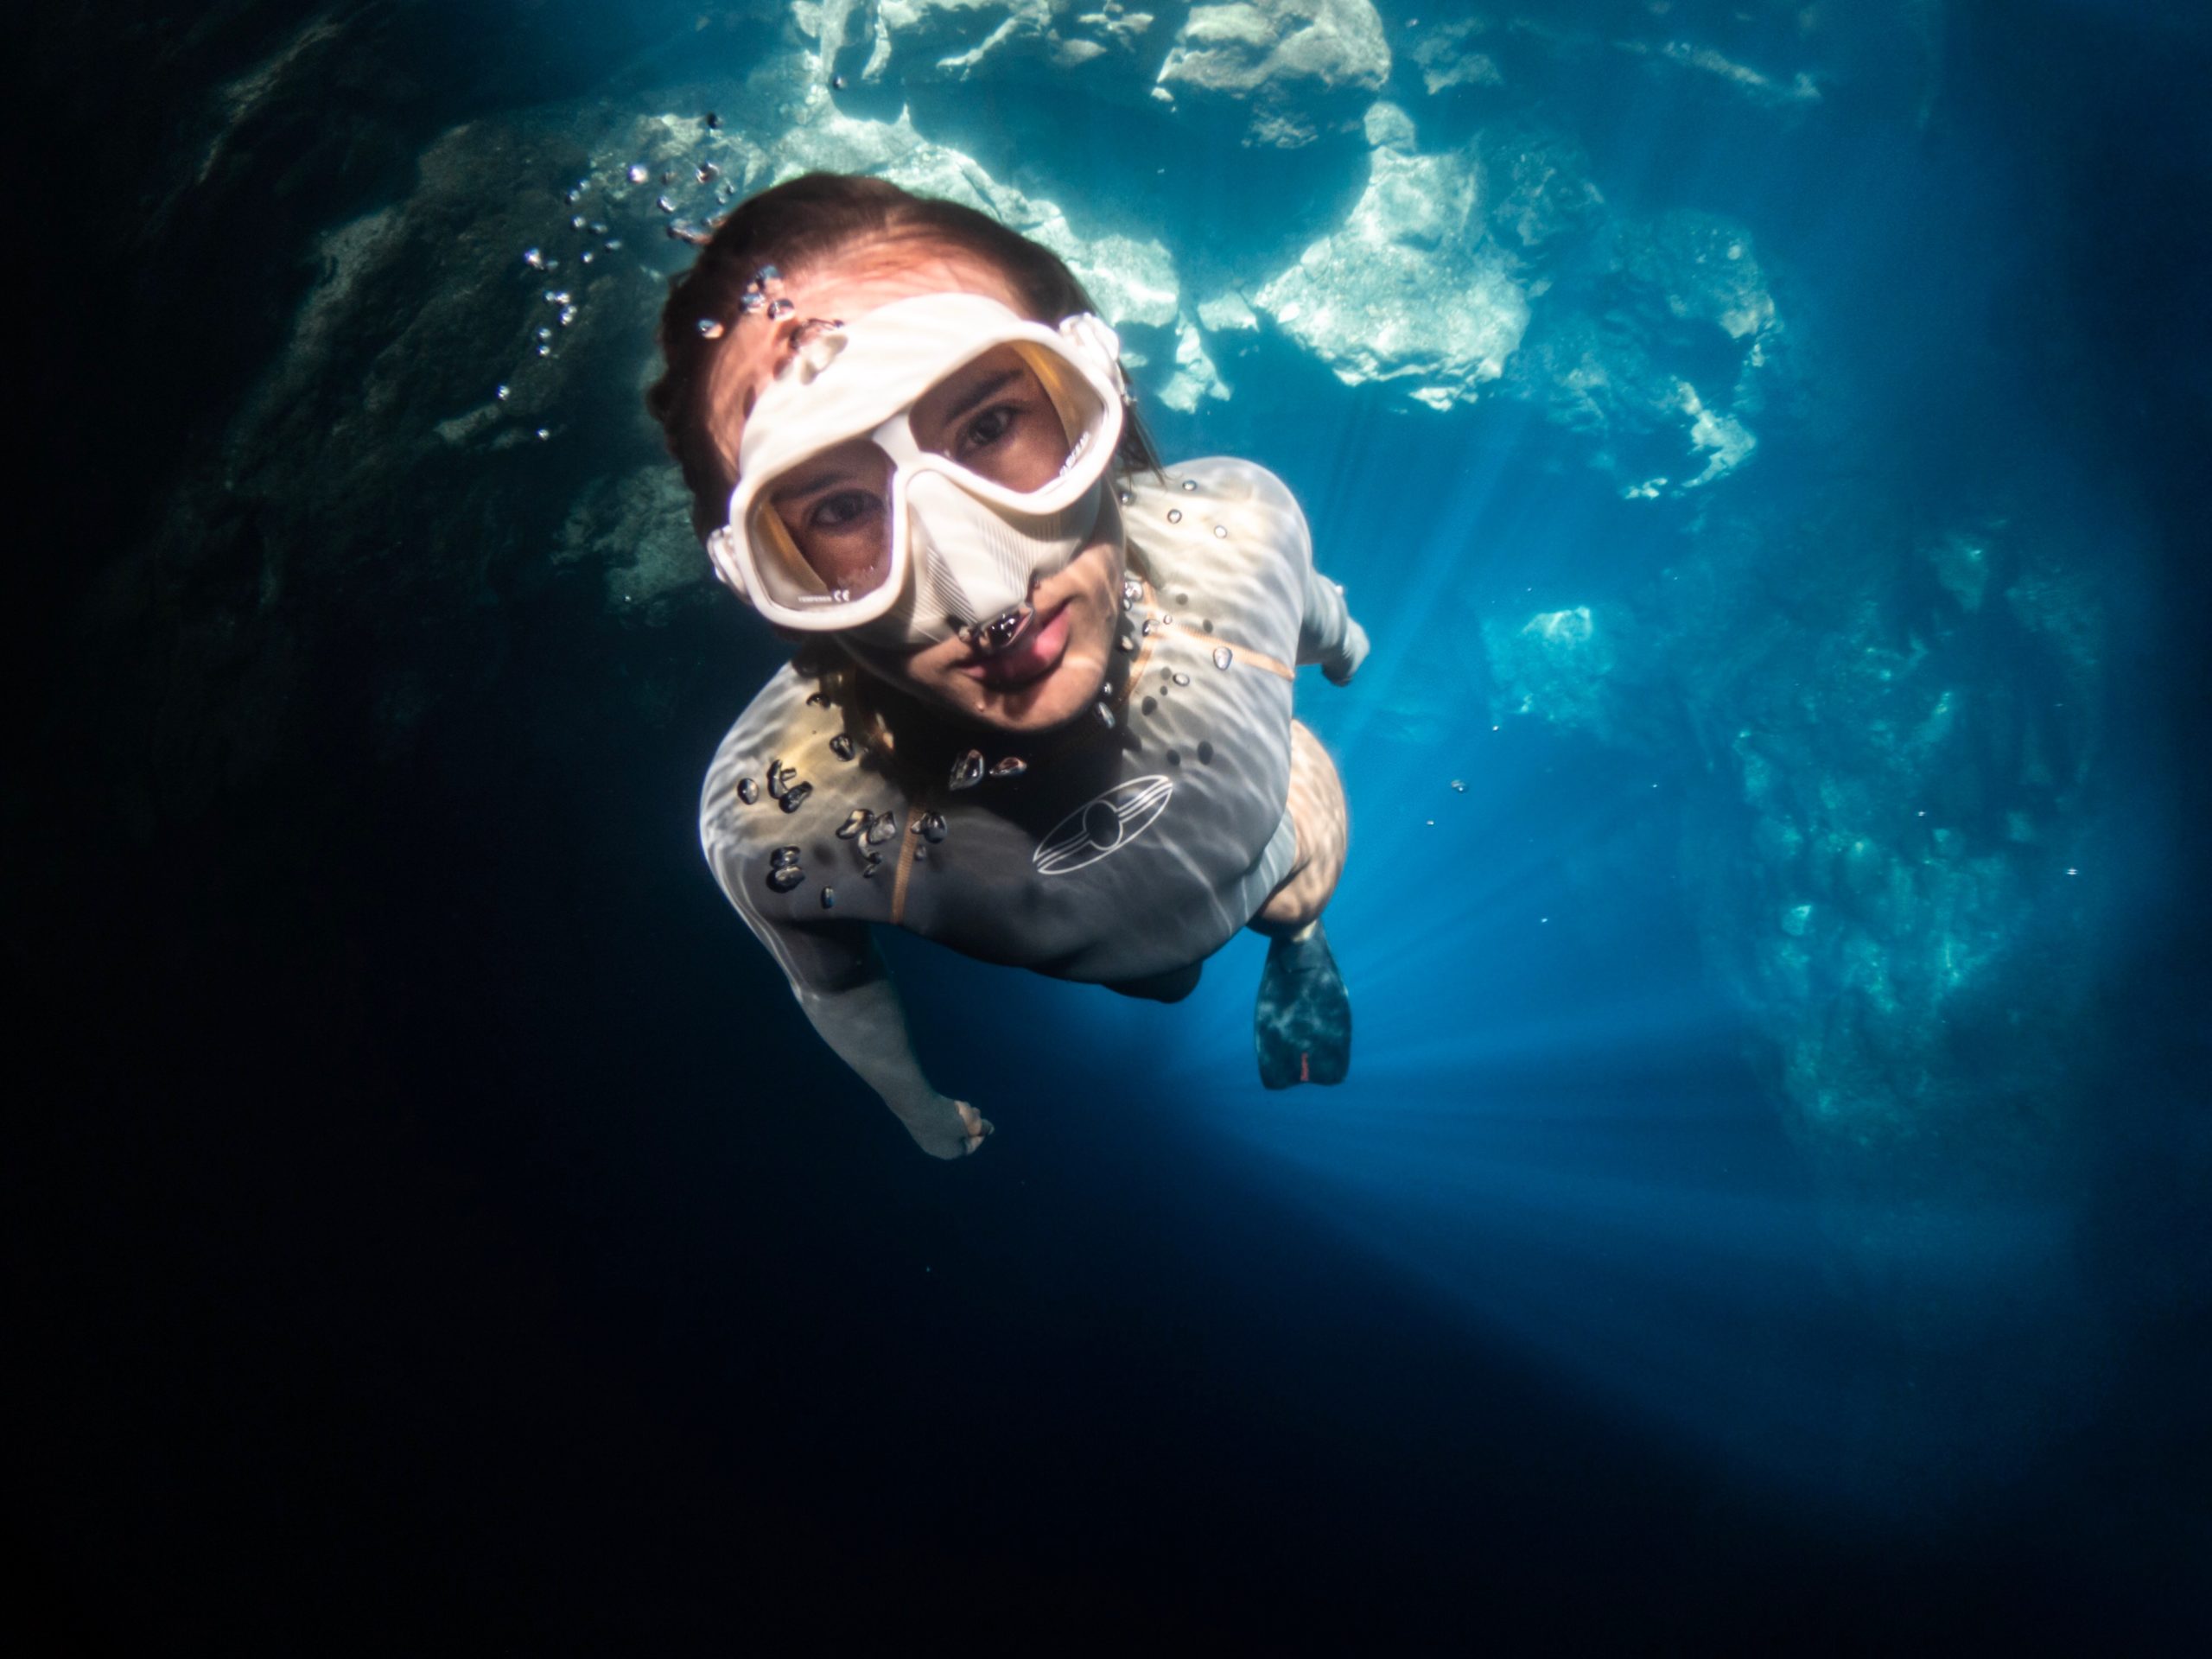 Learn Freediving while discovering a new magical underwater world